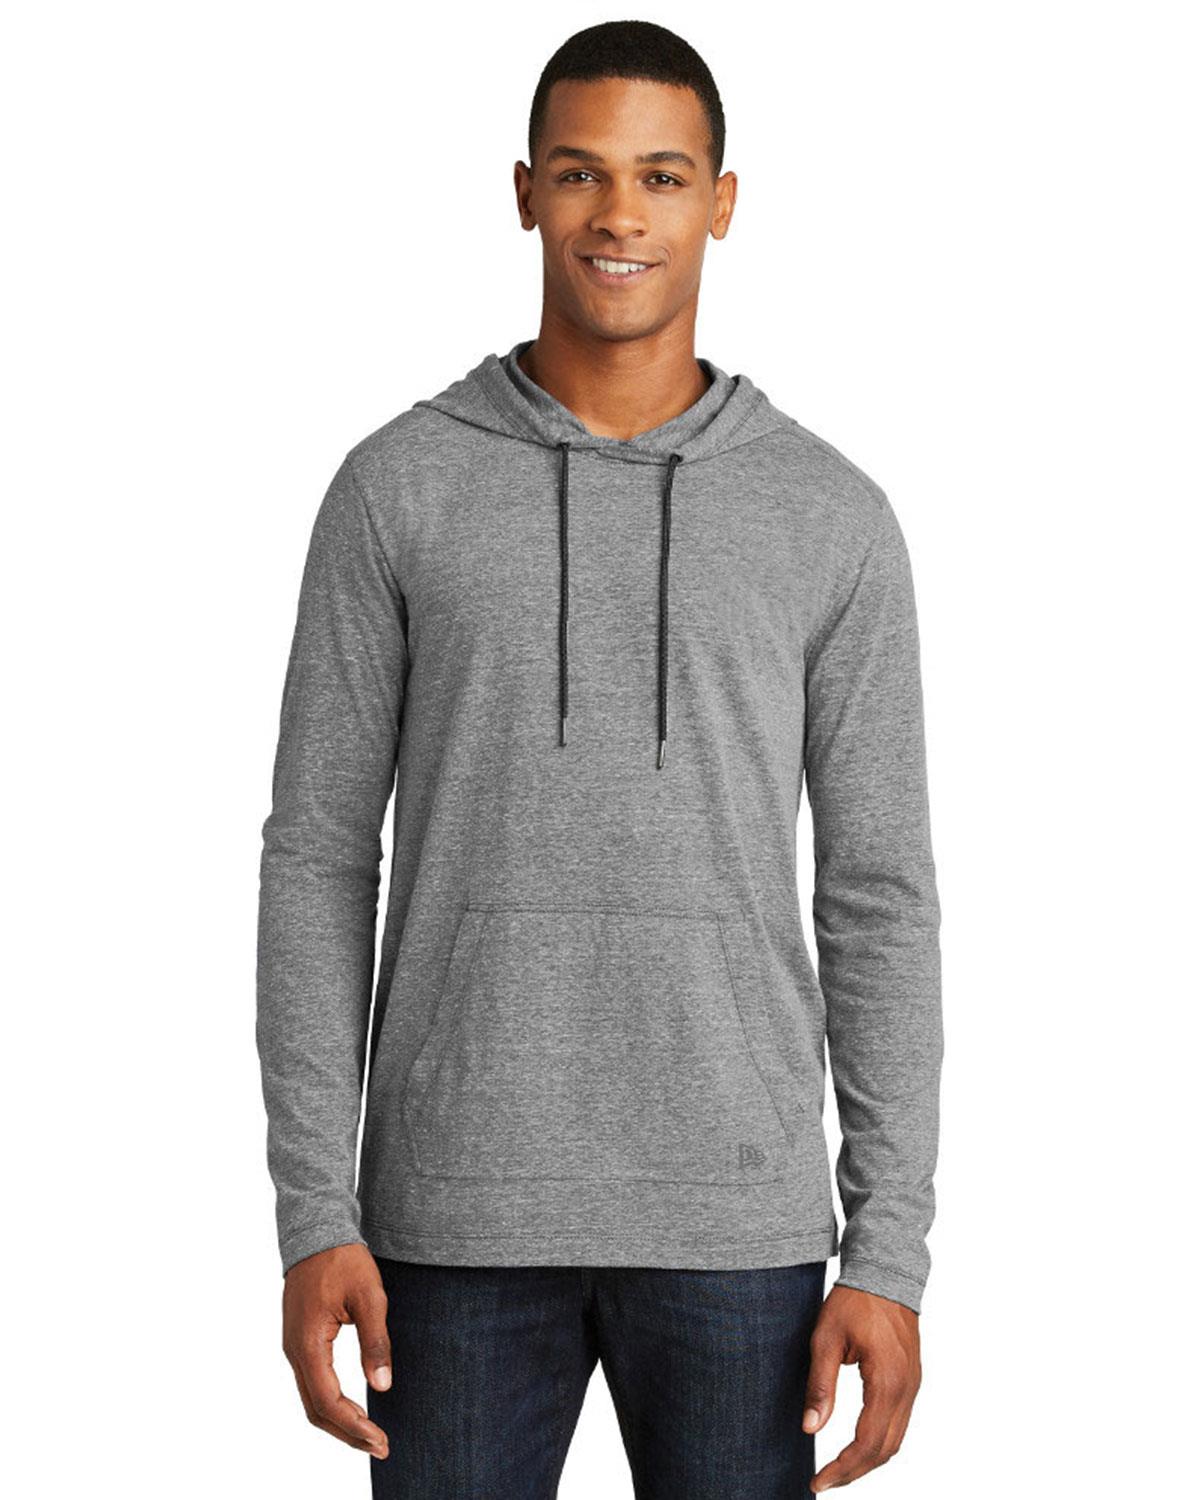 Size Chart for New Era NEA131 Mens Hoodie T-Shirt - A2ZClothing.com